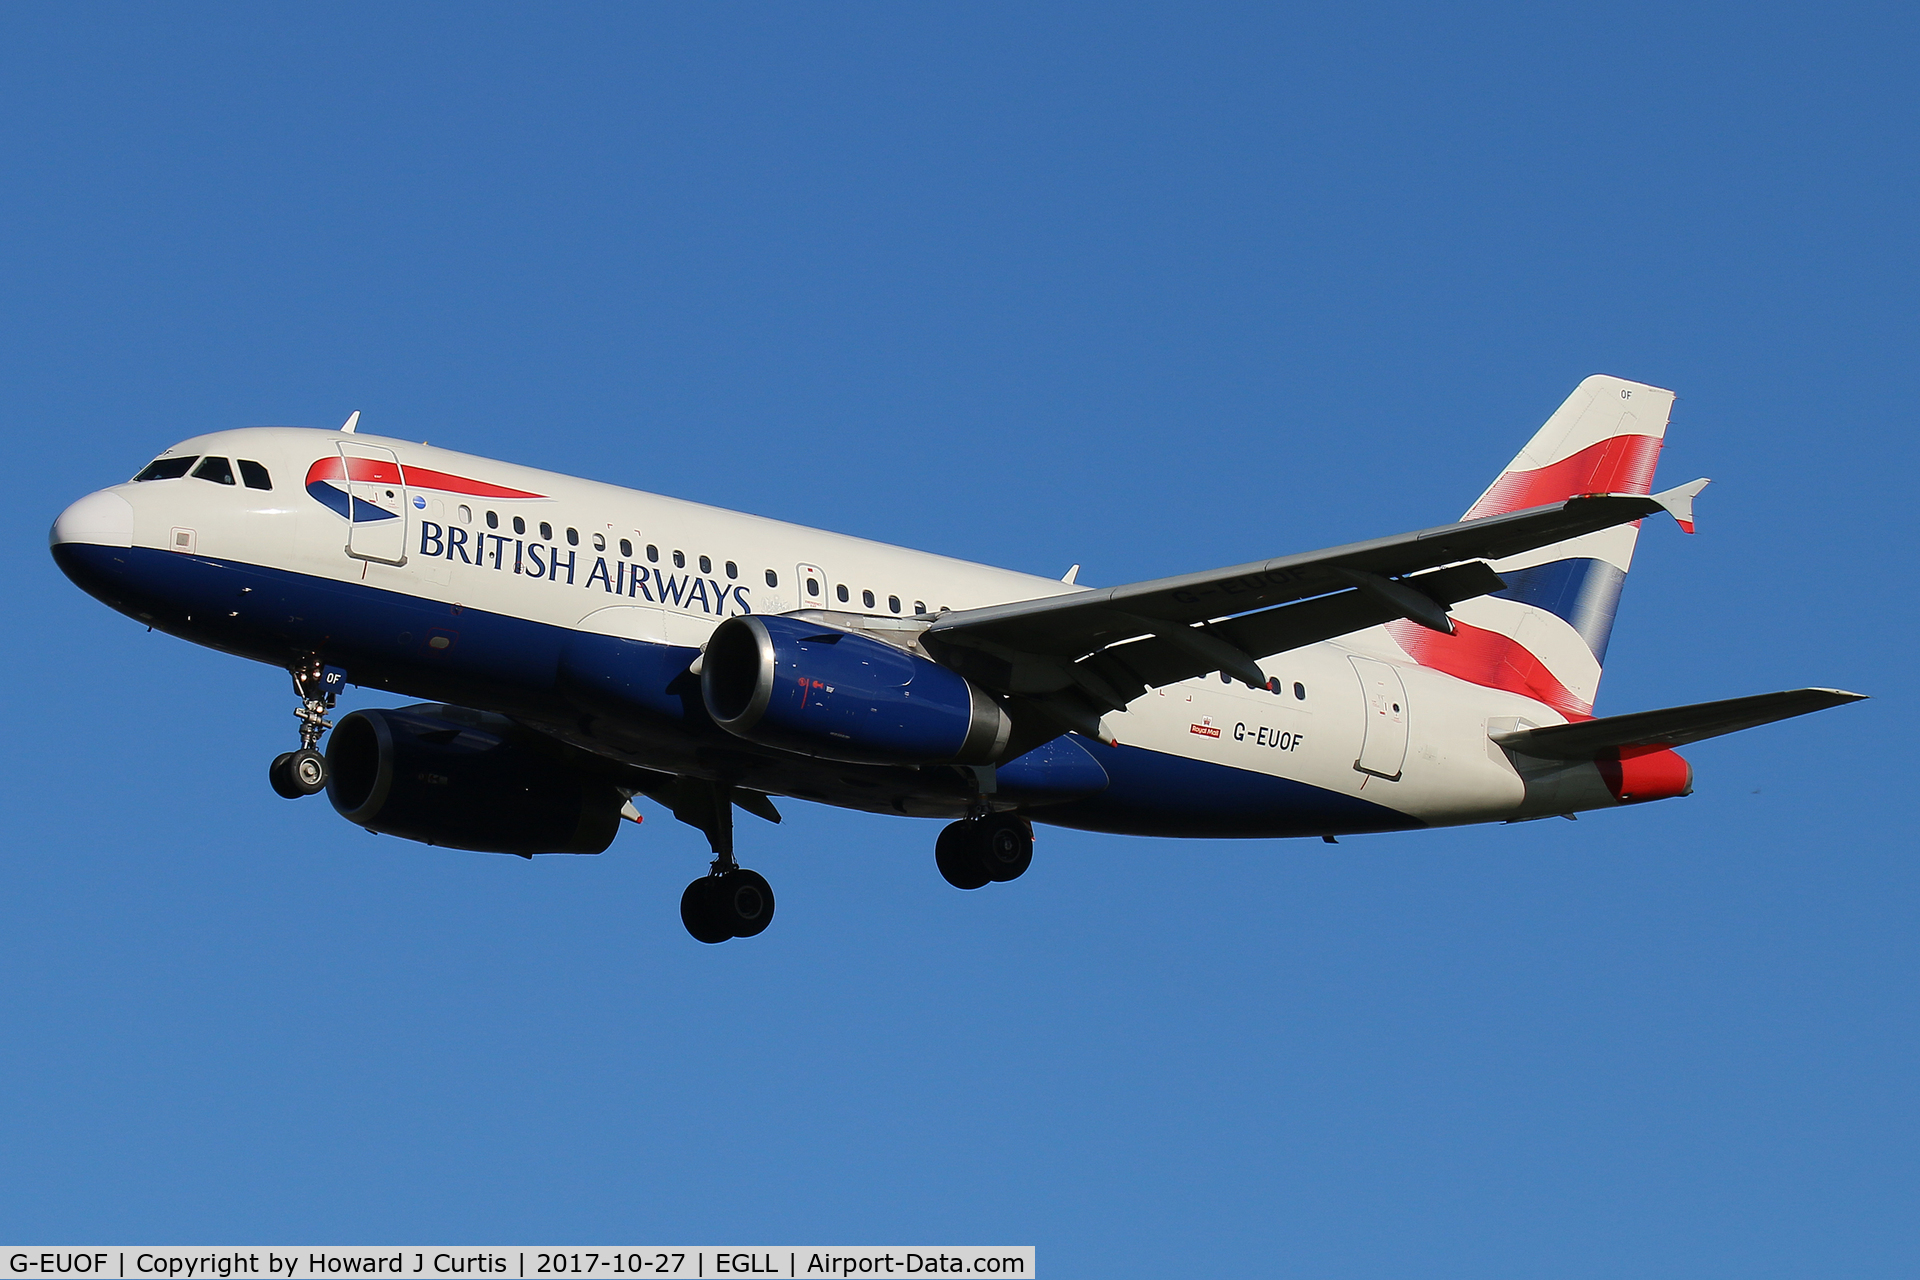 G-EUOF, 2001 Airbus A319-131 C/N 1590, On approach